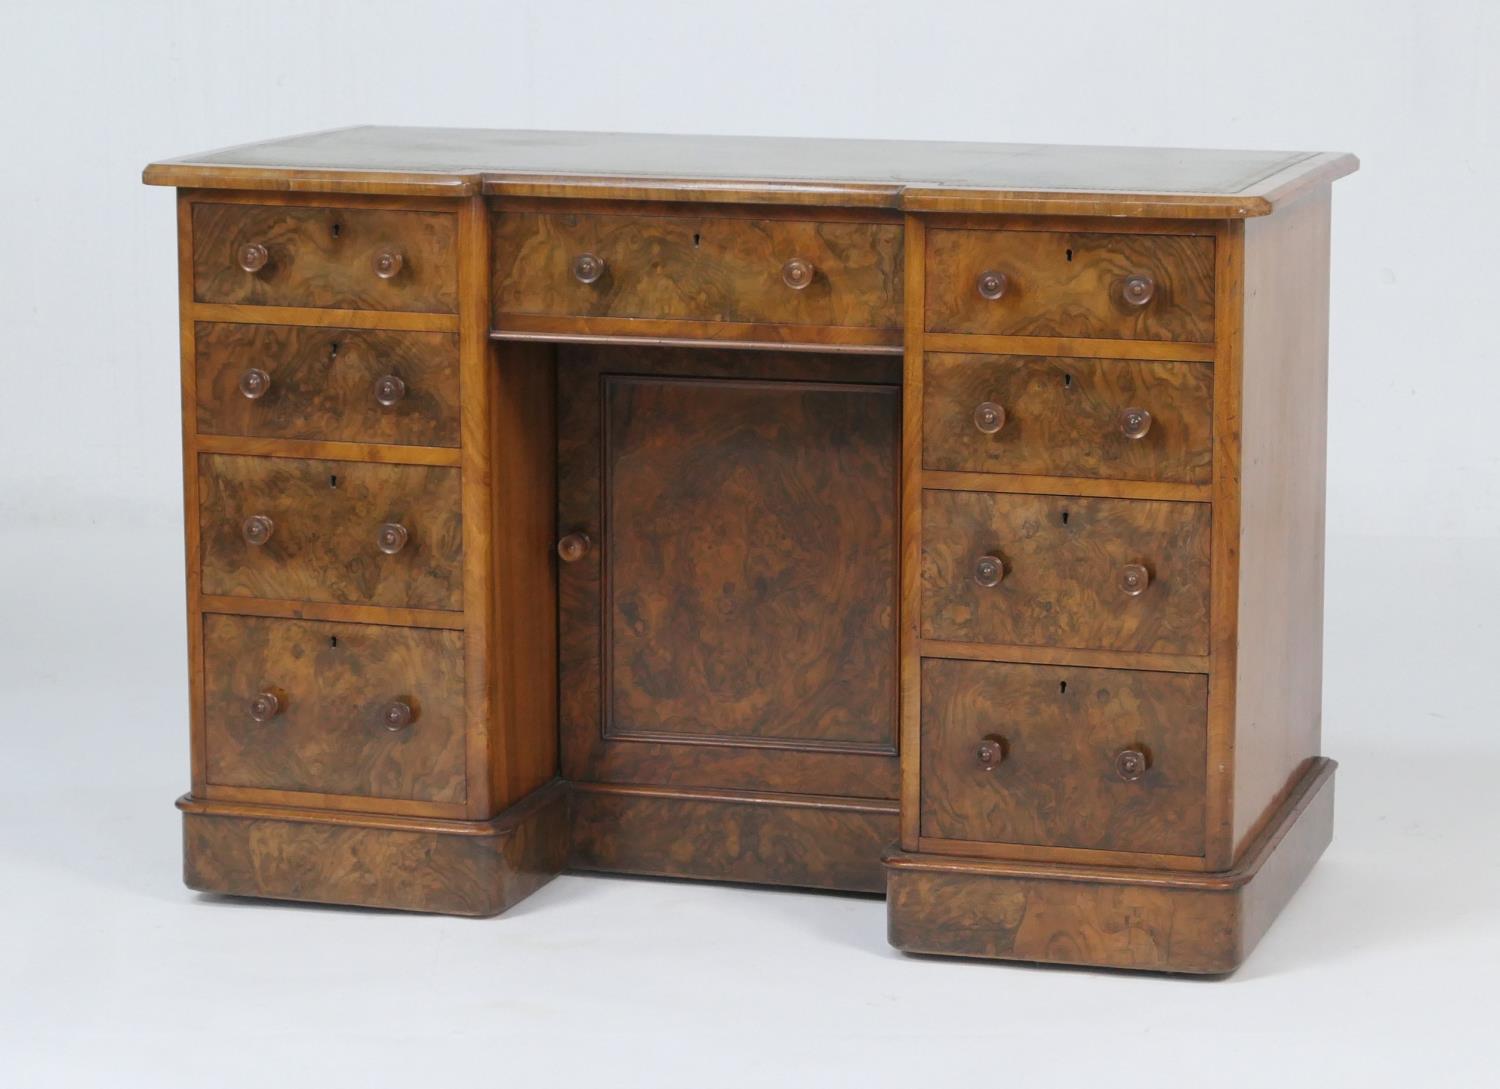 Victorian burr walnut kneehole desk, with inverted breakfront top with gilt tooled leather surface